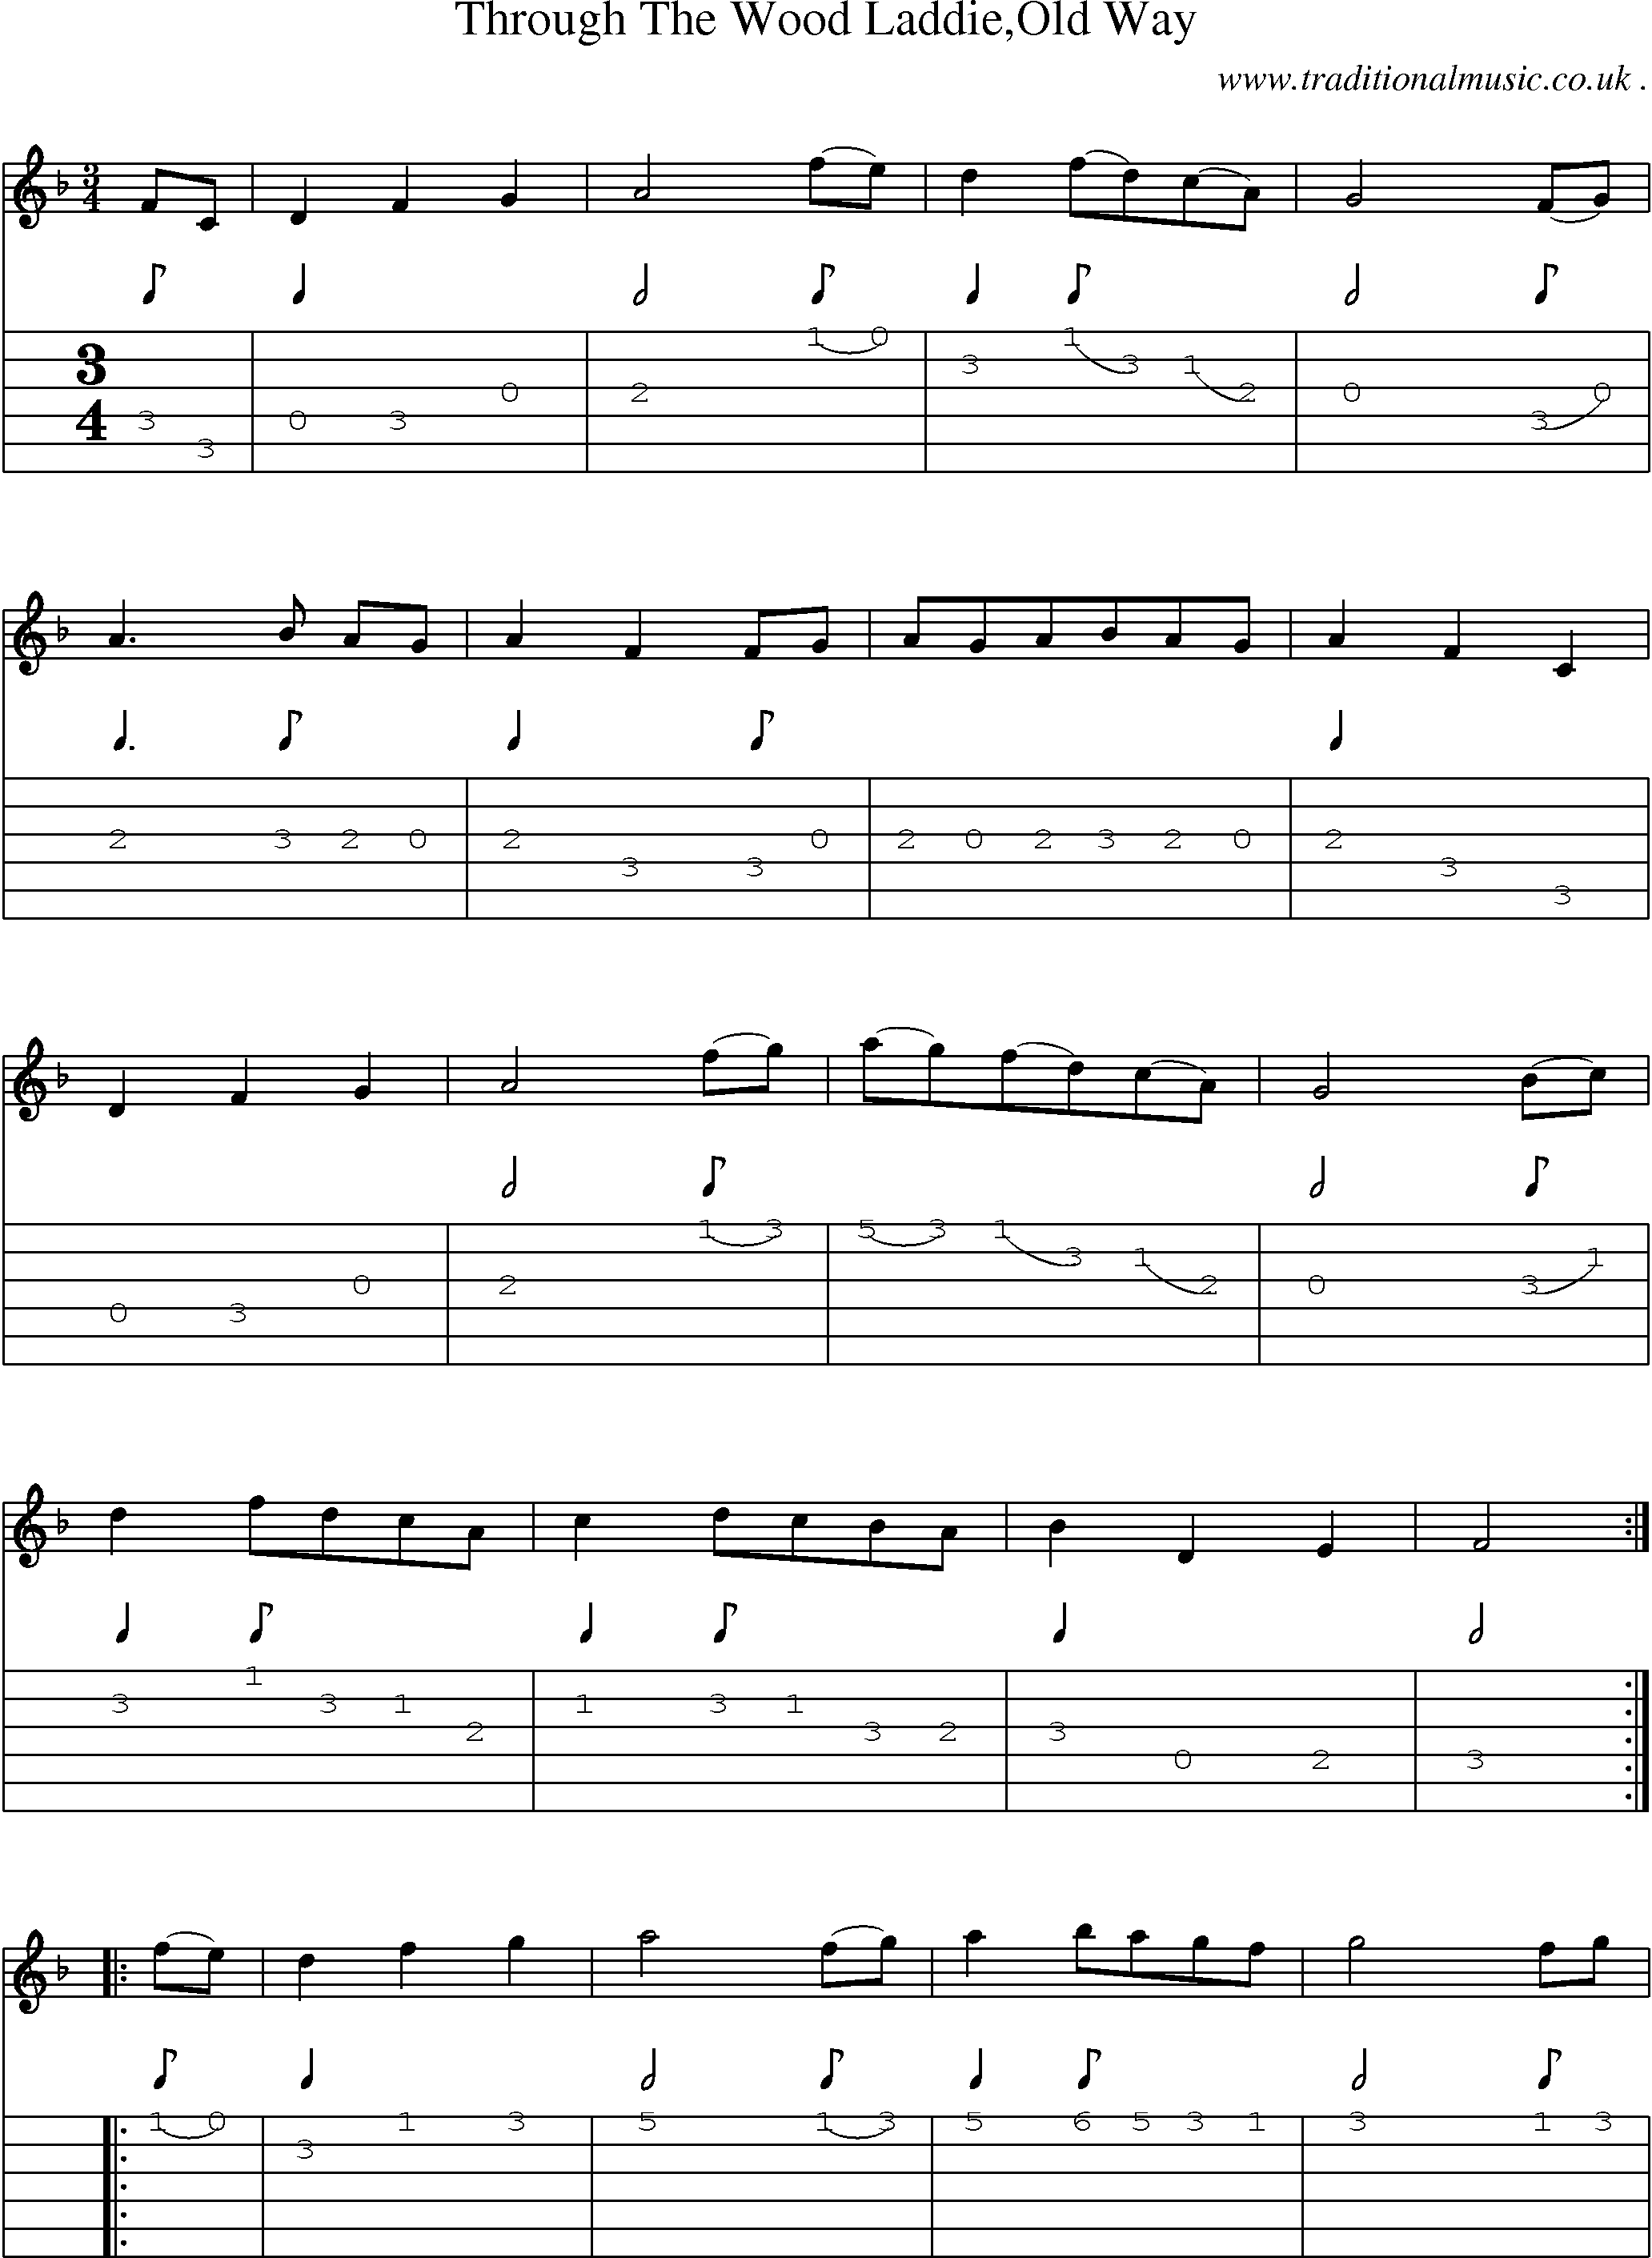 Sheet-Music and Guitar Tabs for Through The Wood Laddieold Way